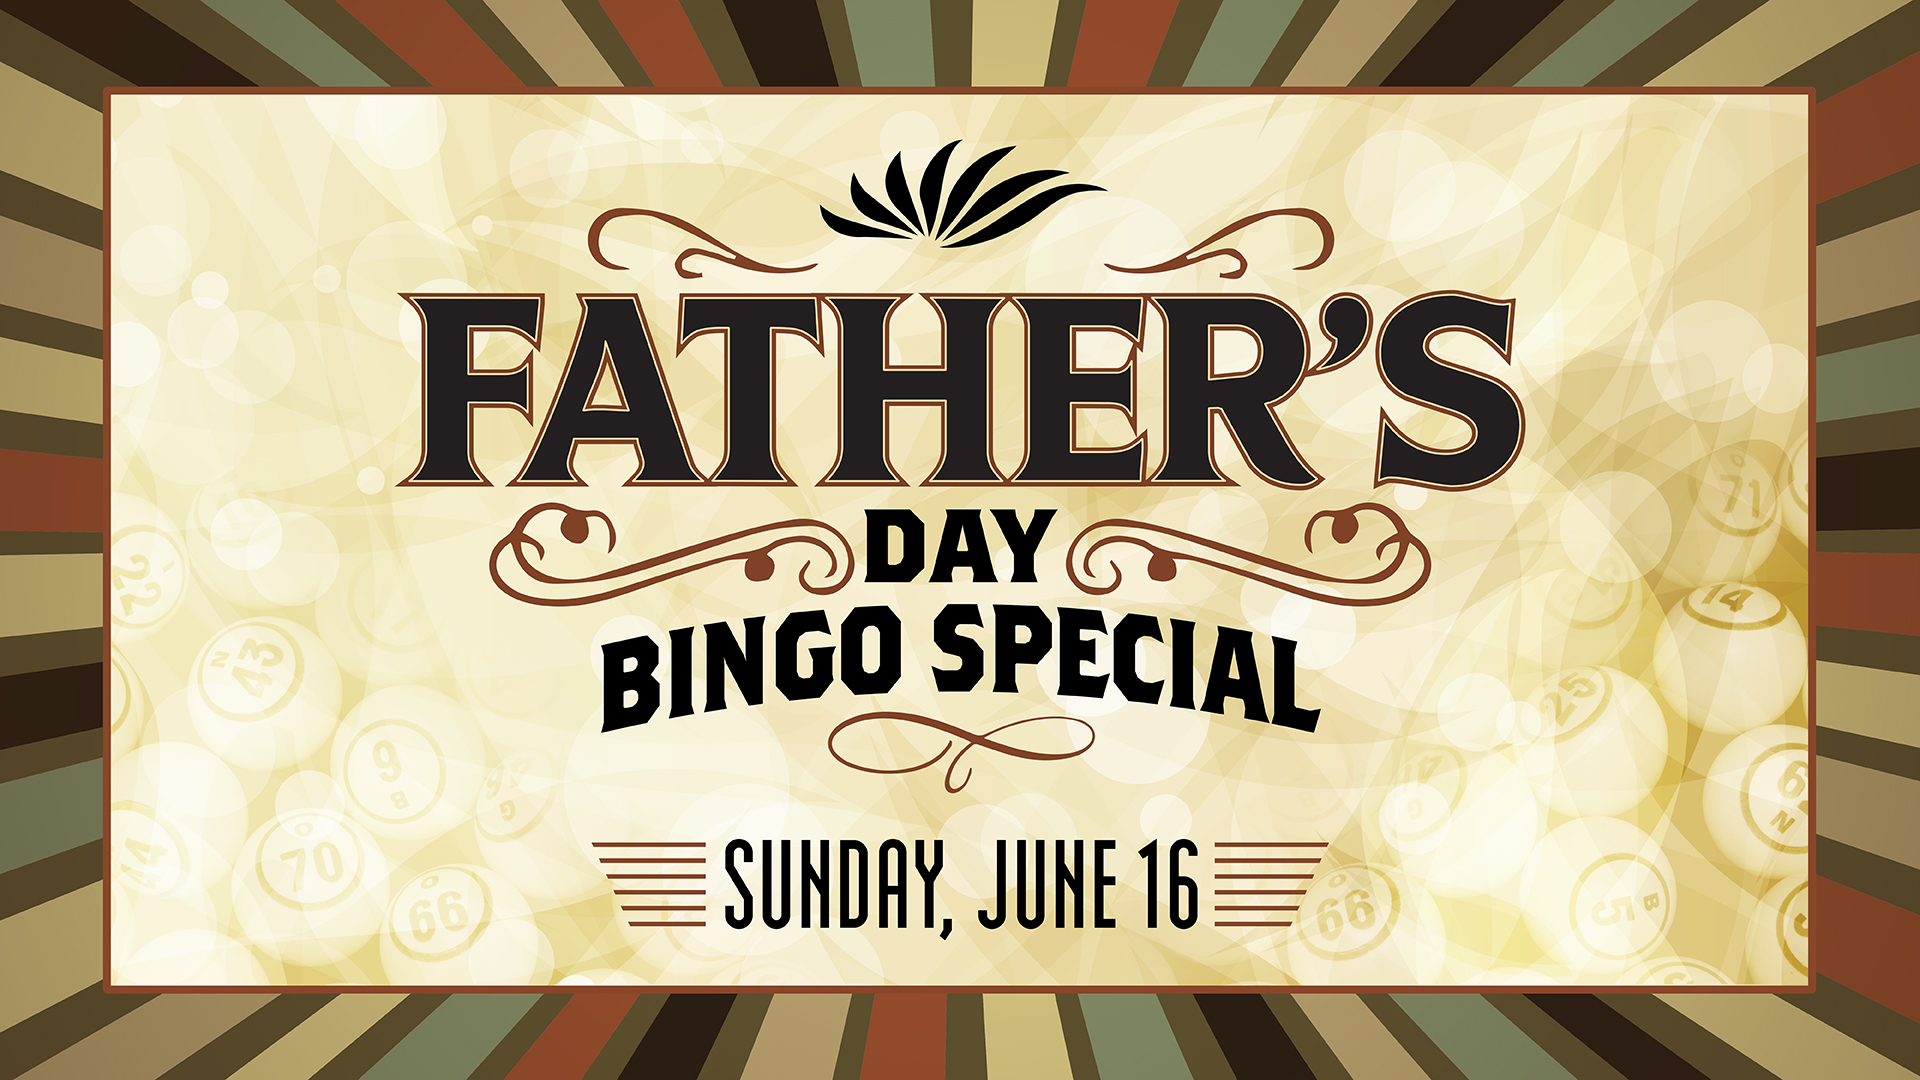 Seven Feathers Casino Resort Celebrates Father's Day With Special Bingo In Canyonville Oregon